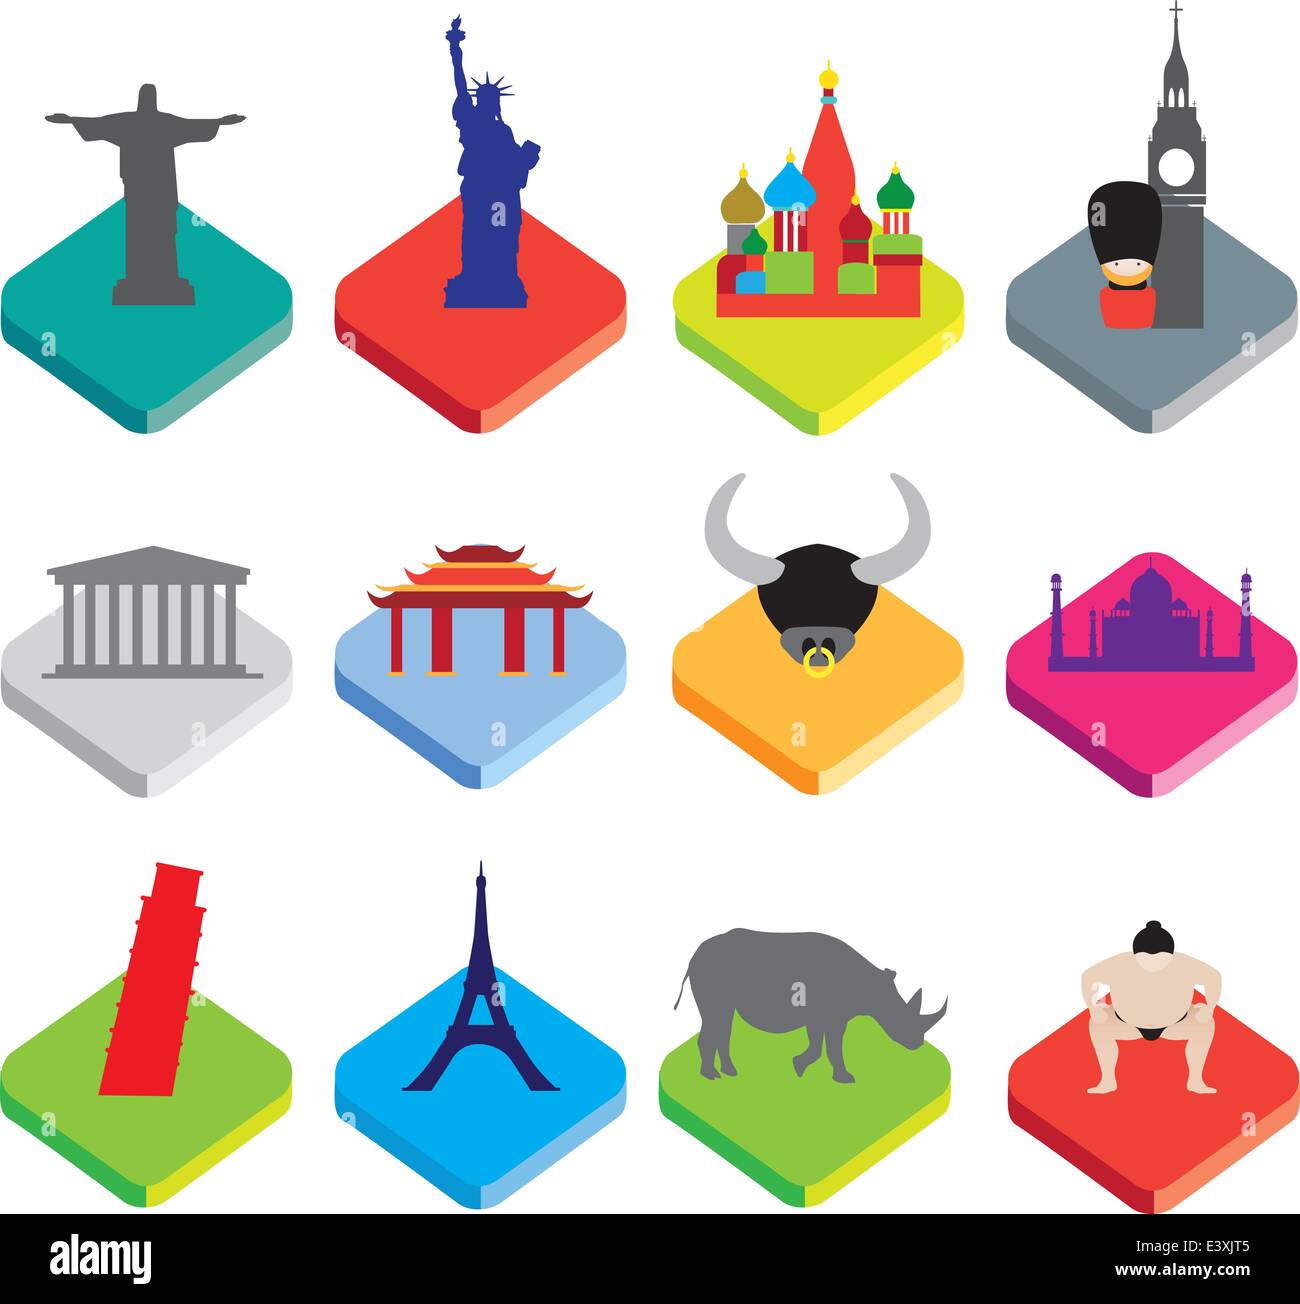 world famous landmarks as icon or button designs in colour on white background Stock Vector